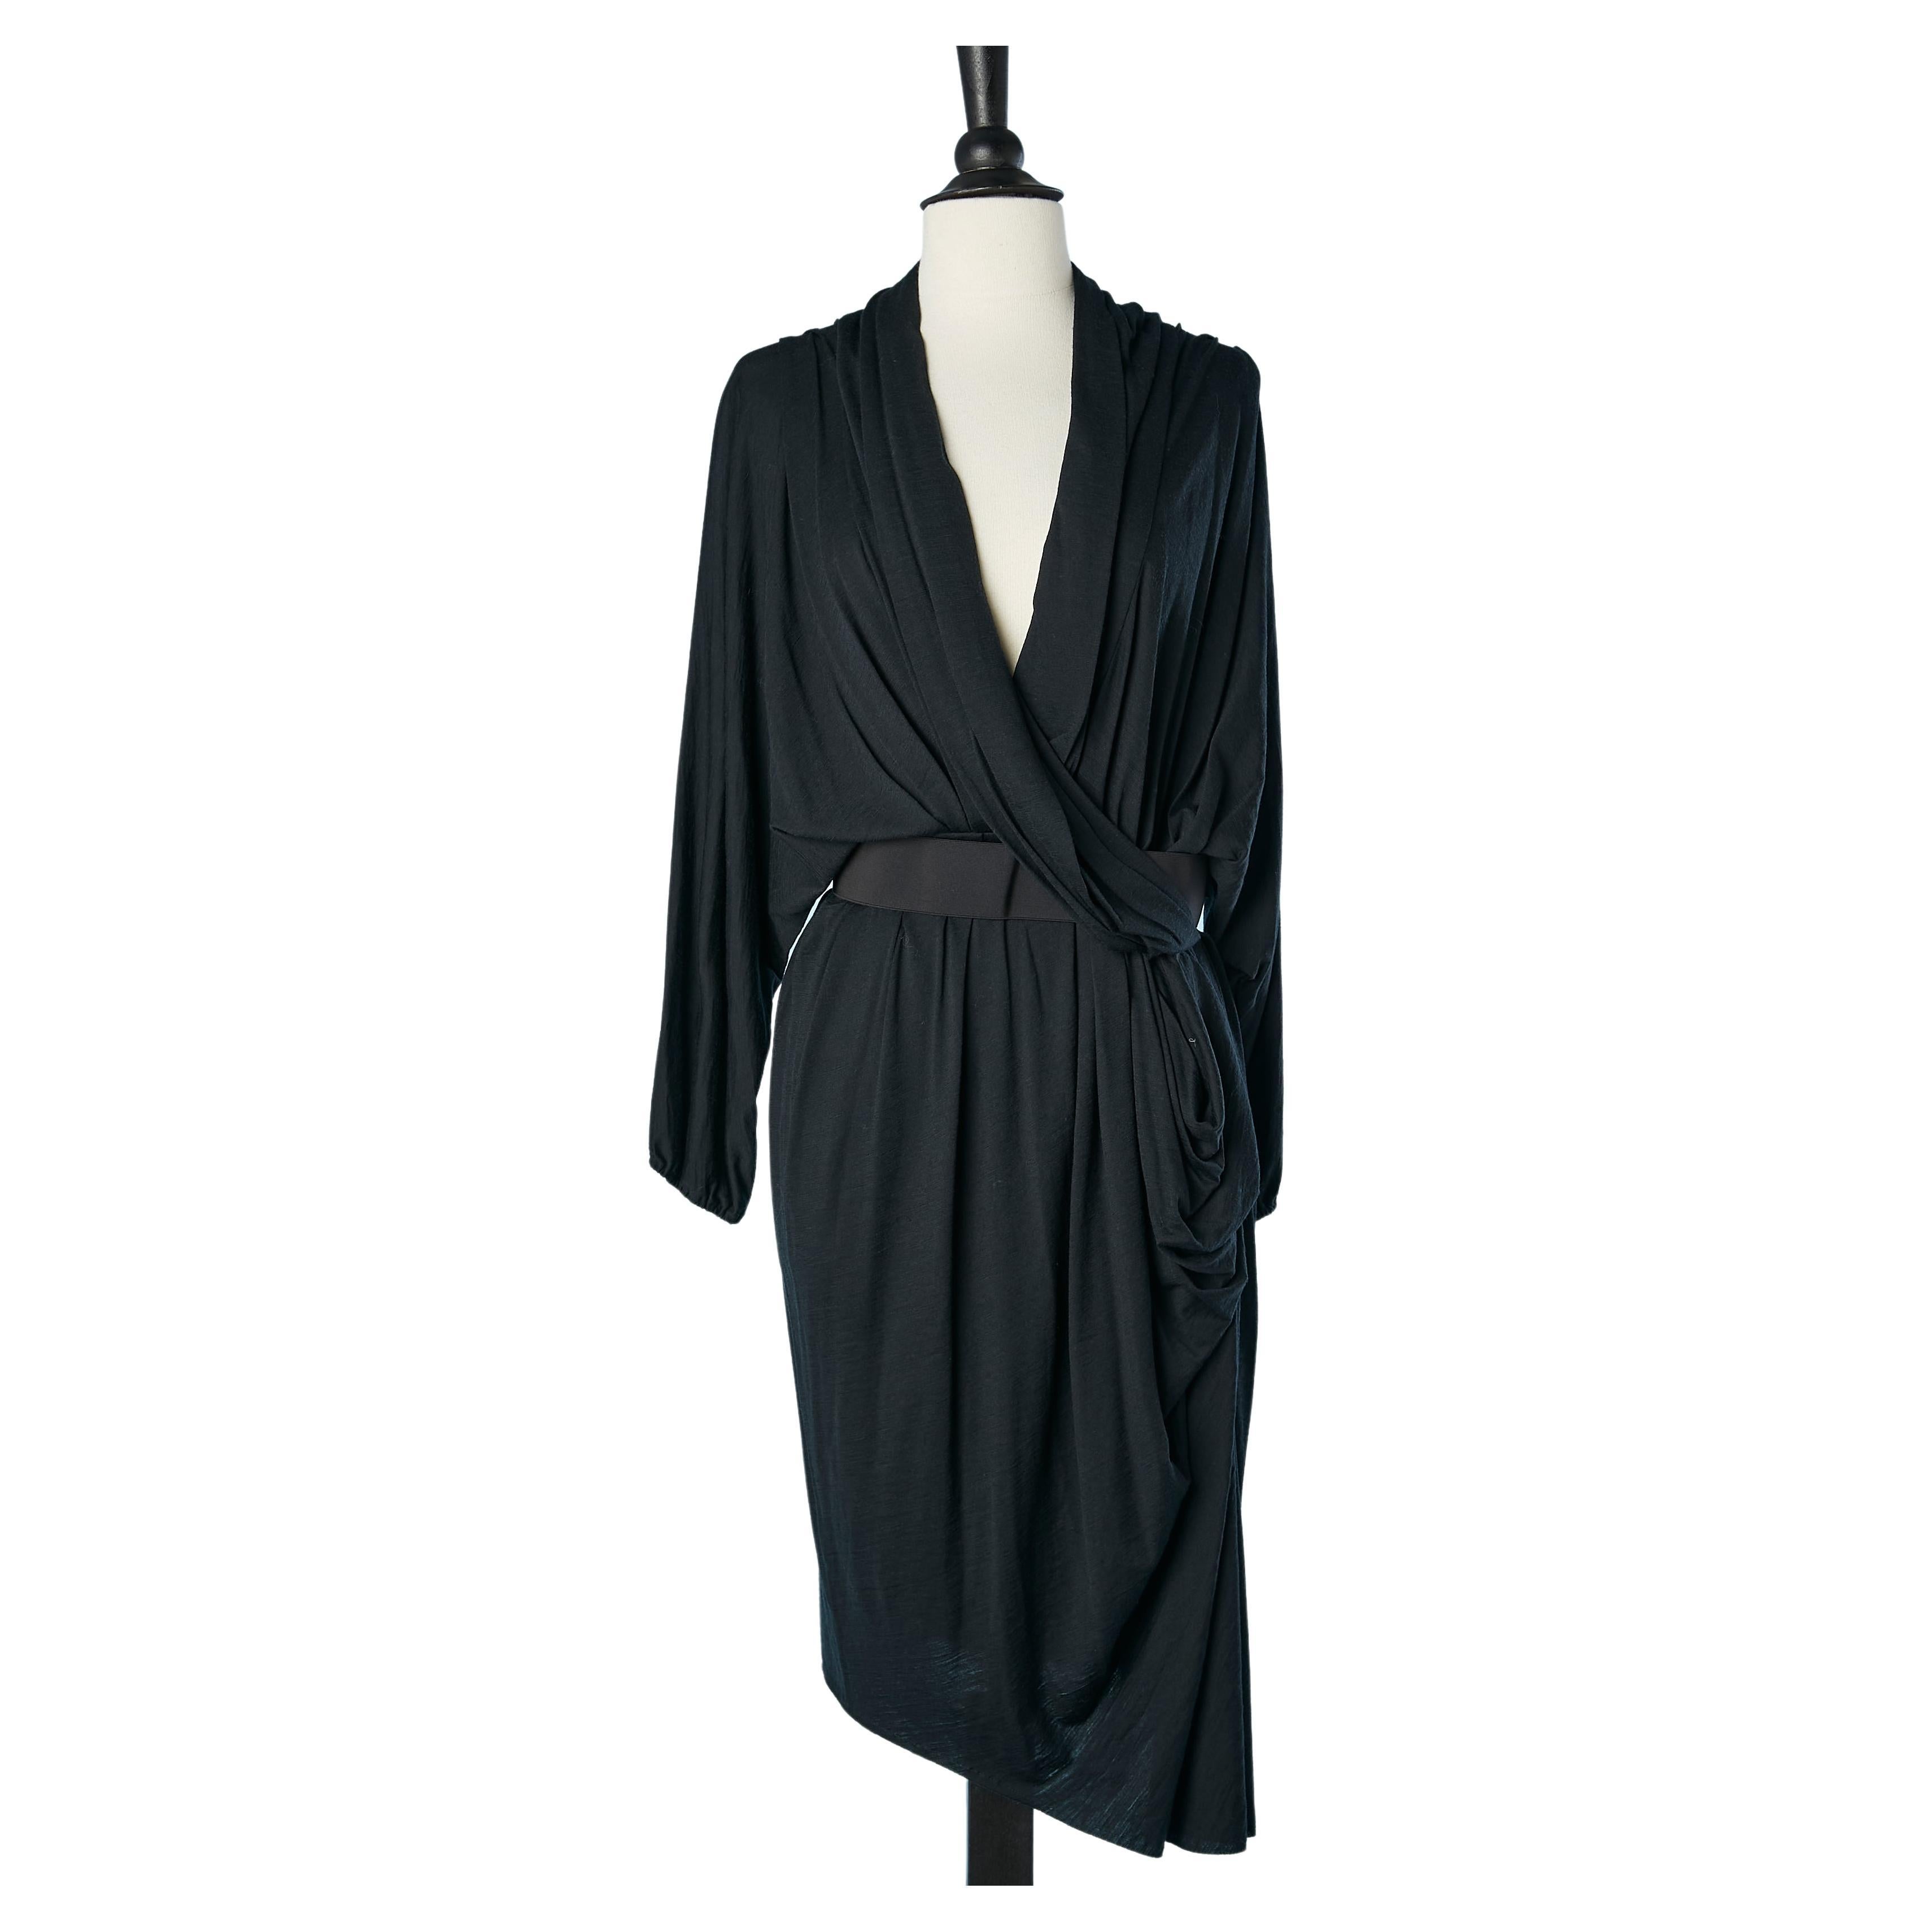 Wool drape jersey dress with elastic waist band Lanvin by A.Elbaz for Corso Como